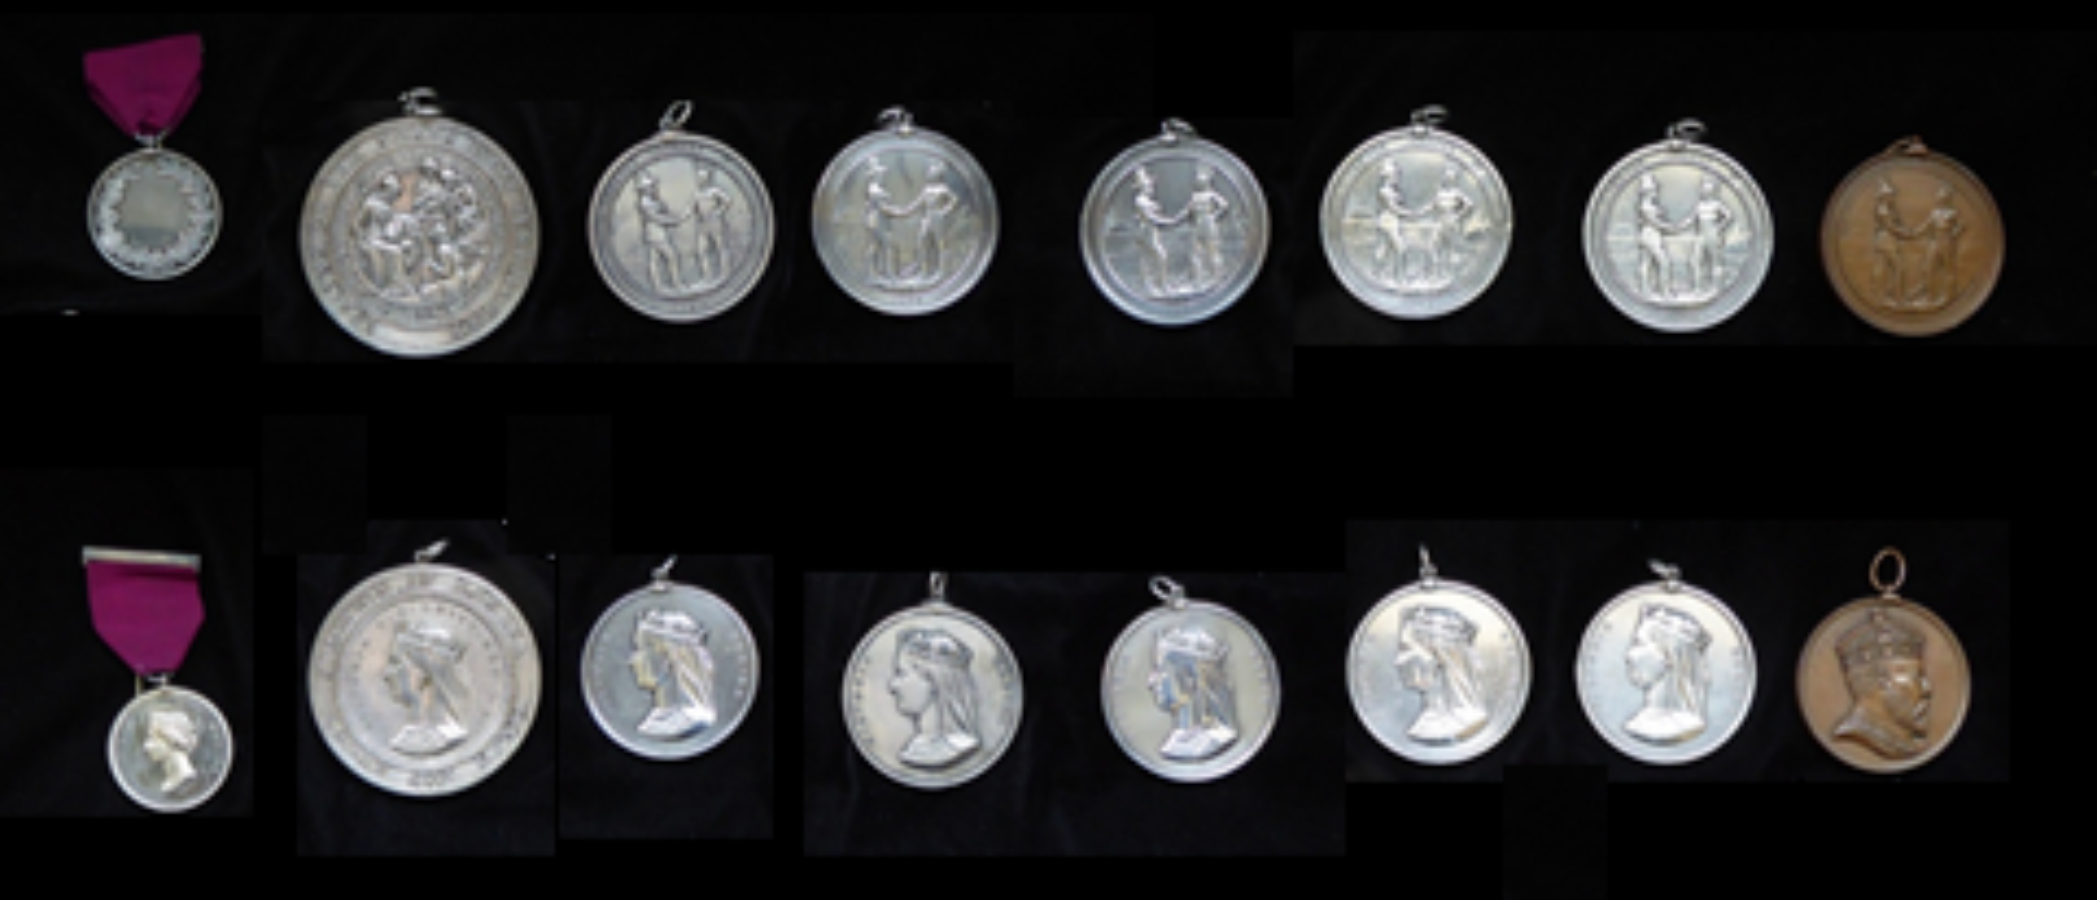 Photograph of eight Treaty Medals on a black background. Top row is the front of each medal, bottom row is the back of each medal.